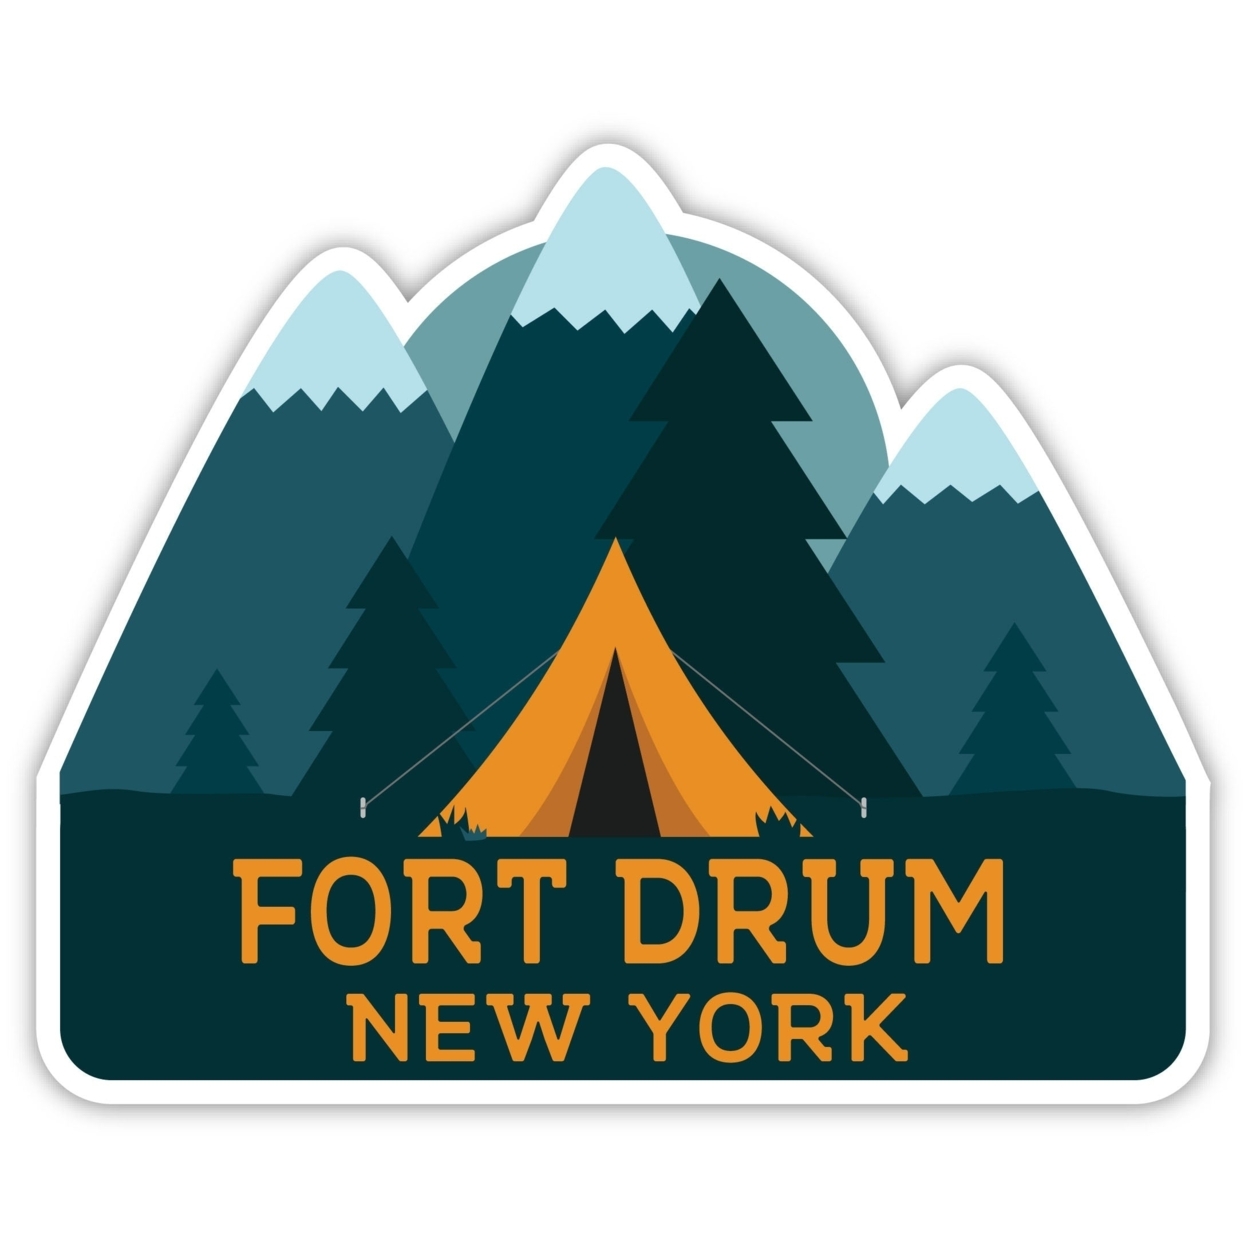 Fort Drum New York Souvenir Decorative Stickers (Choose Theme And Size) - 4-Pack, 4-Inch, Tent